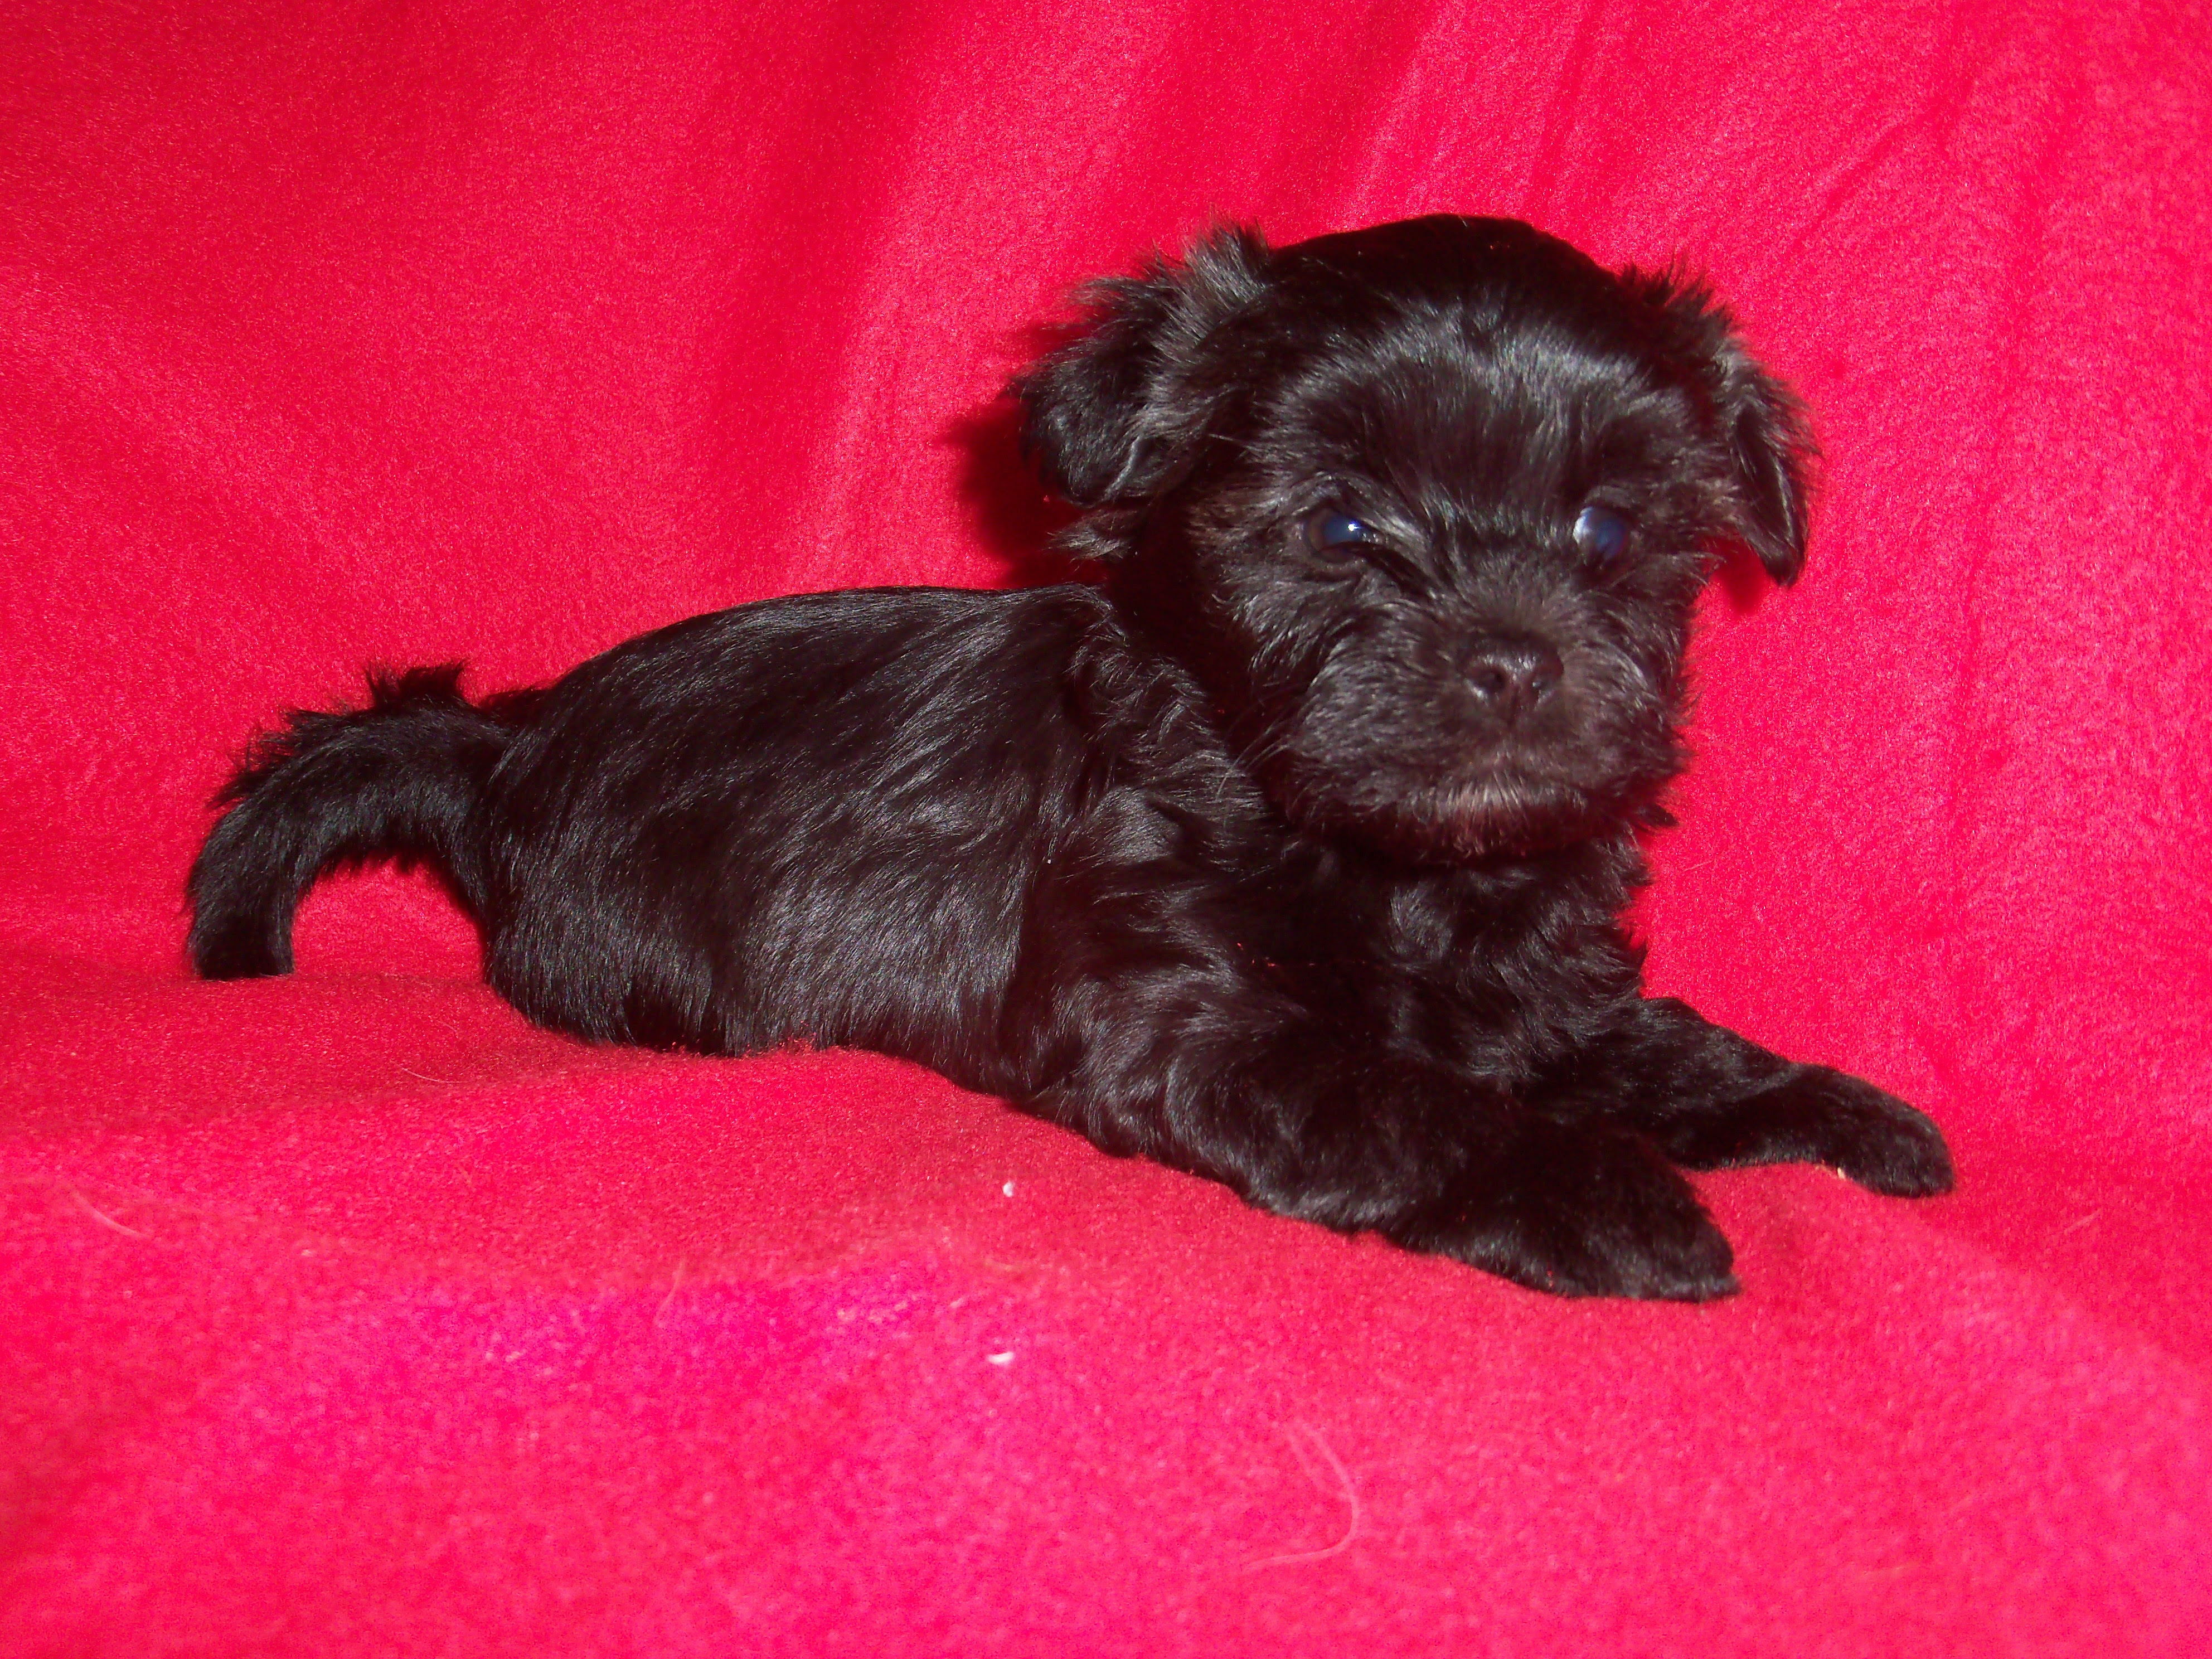 Cupids havanese in waynesville ohio raises outstanding havanese puppies for exceptional we specialize in rare red havanese puppies and occasionally black & white havanese puppies. Legin S Havanese Central Pennsylvania Breeder Of Havanese Puppies Since 2001